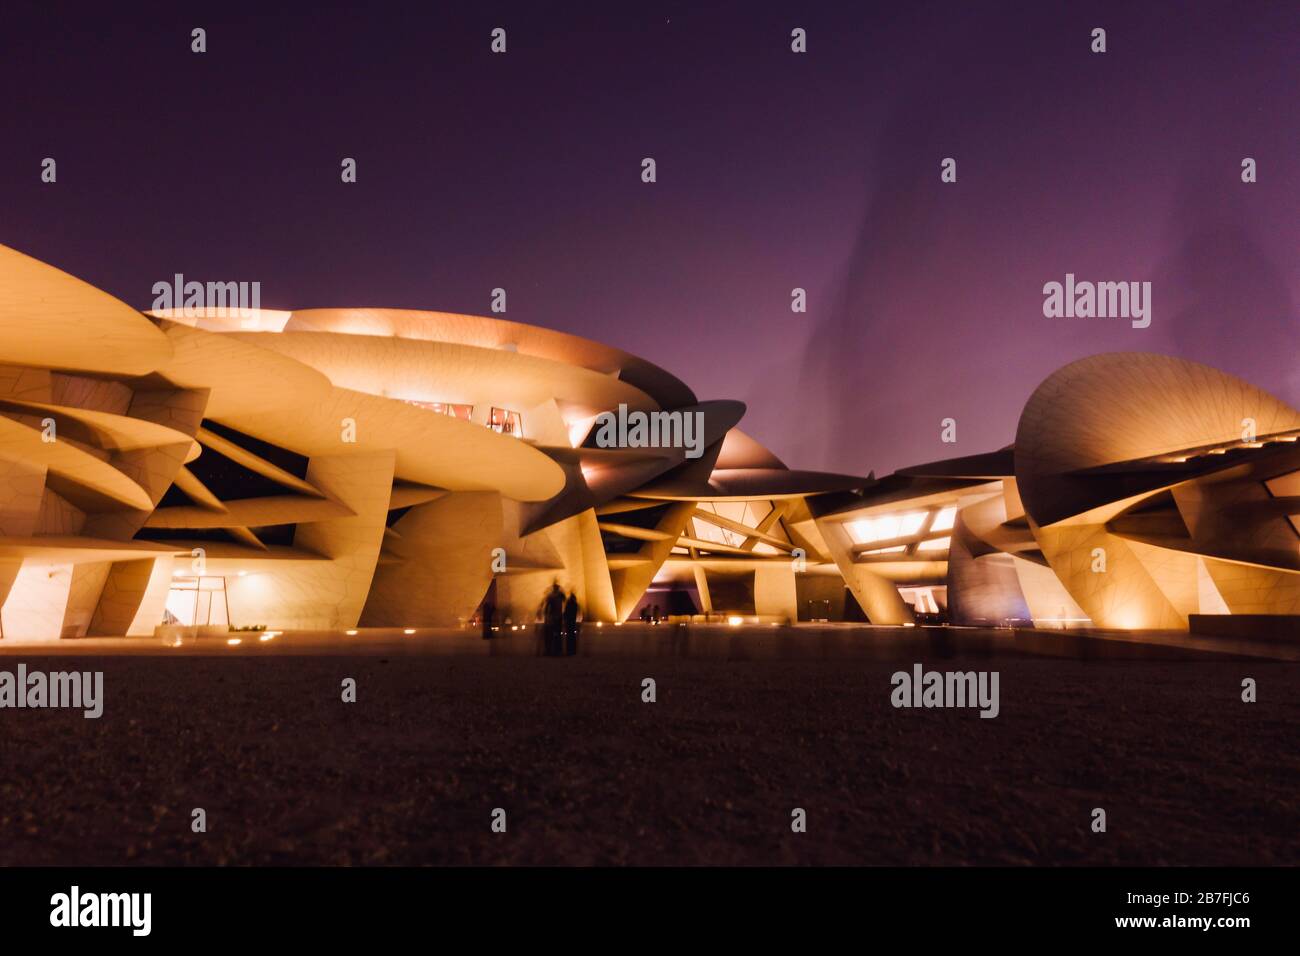 Night time shot of the National Museum of Qatar, with its striking disc-based design, in Doha, Qatar Stock Photo